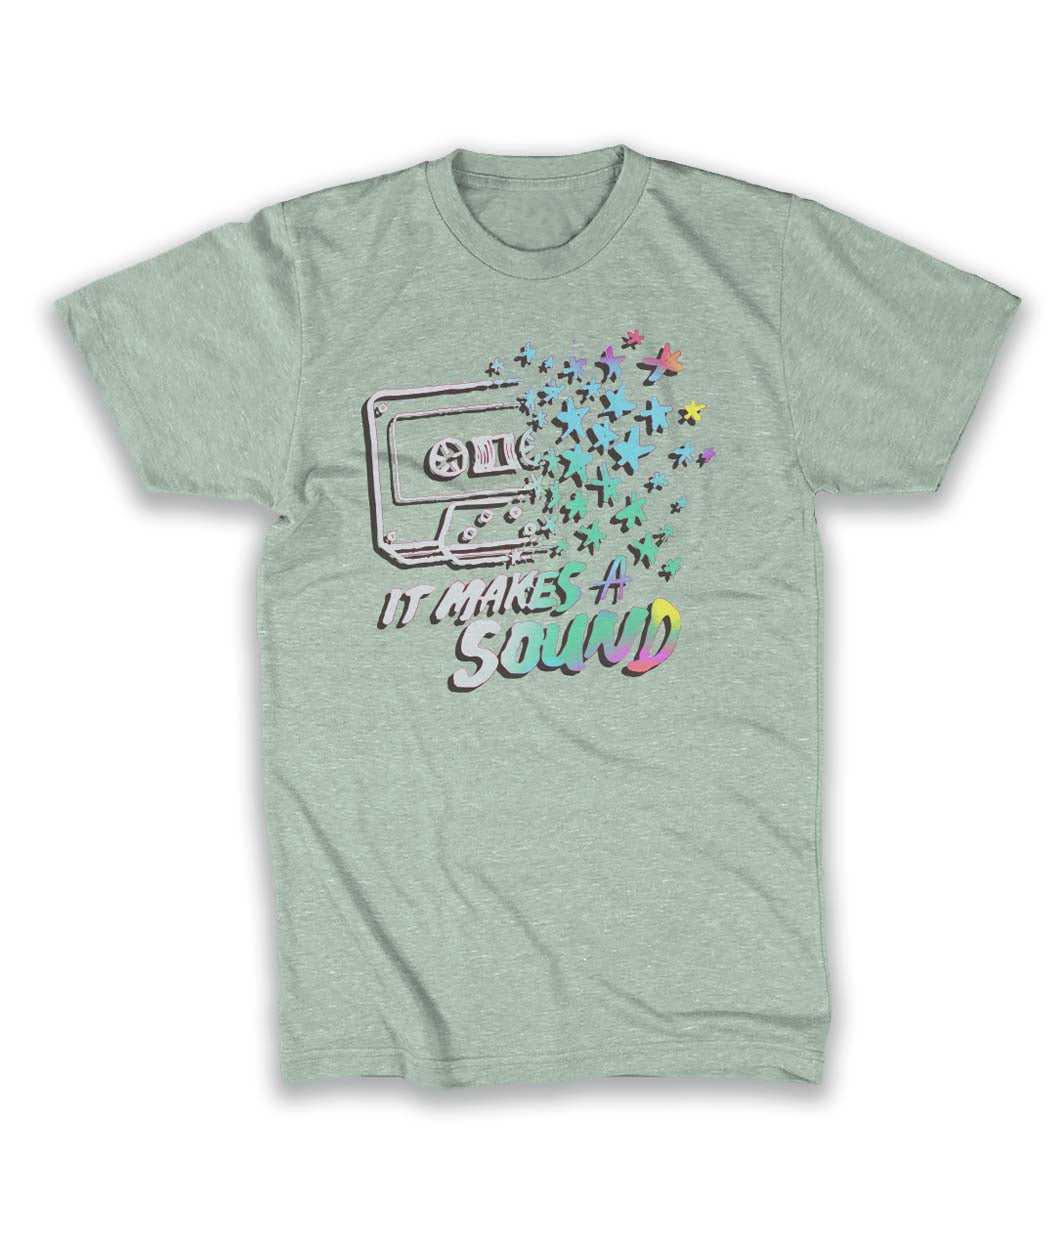 A mint t-shirt  with a cassette tape dissolving into colorful stars. The words 